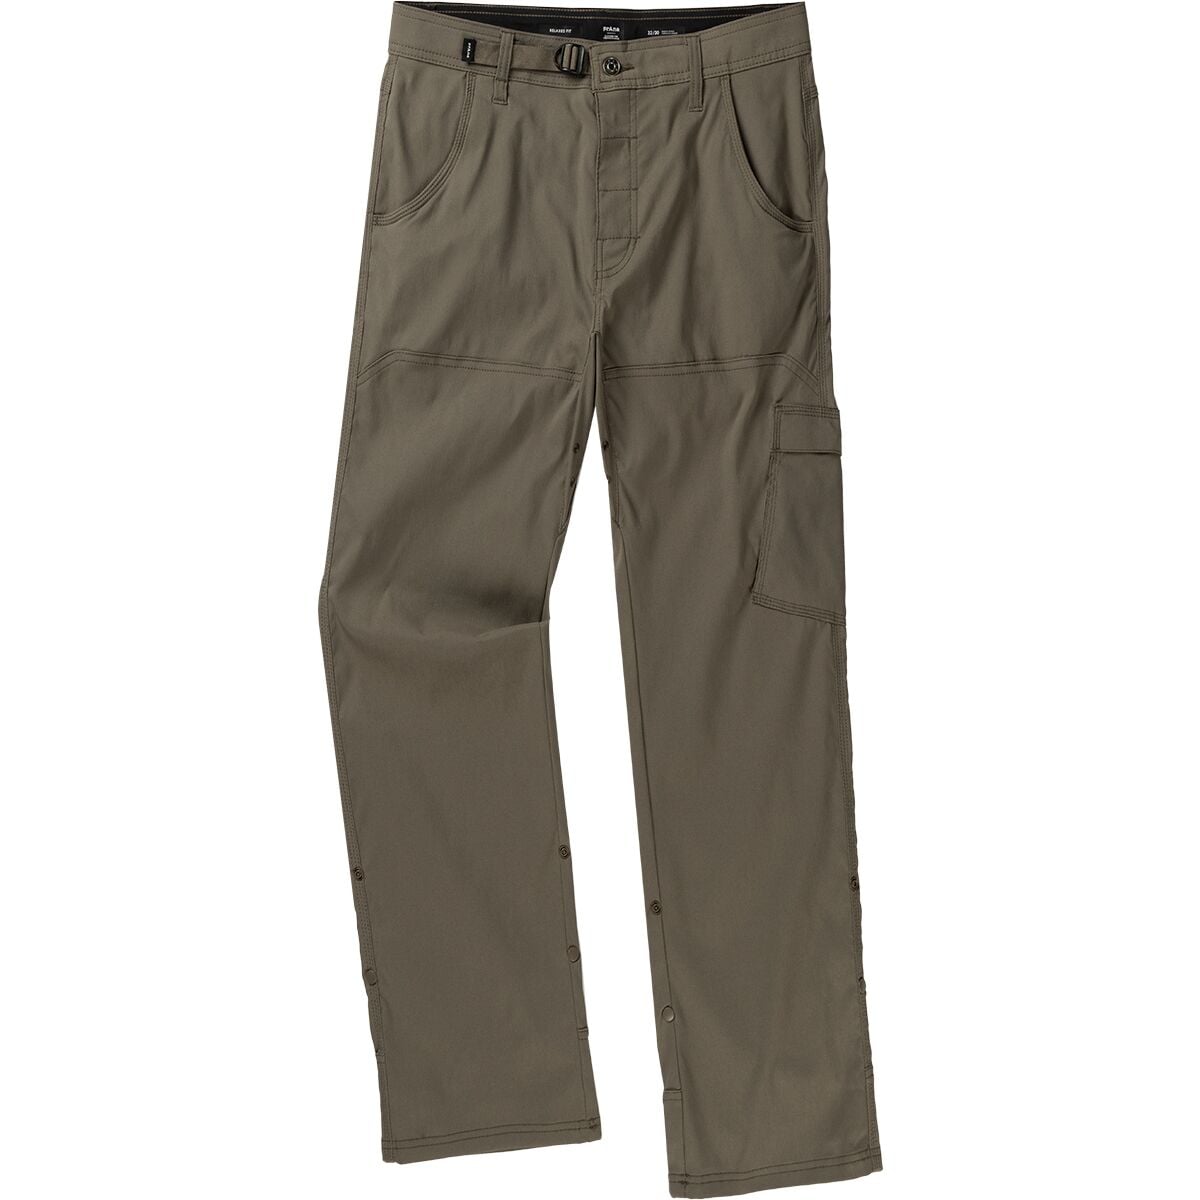 Prana Stretch Zion Pant Review - Best Backpacking/Hunting Pant of All –  Alpen Fuel